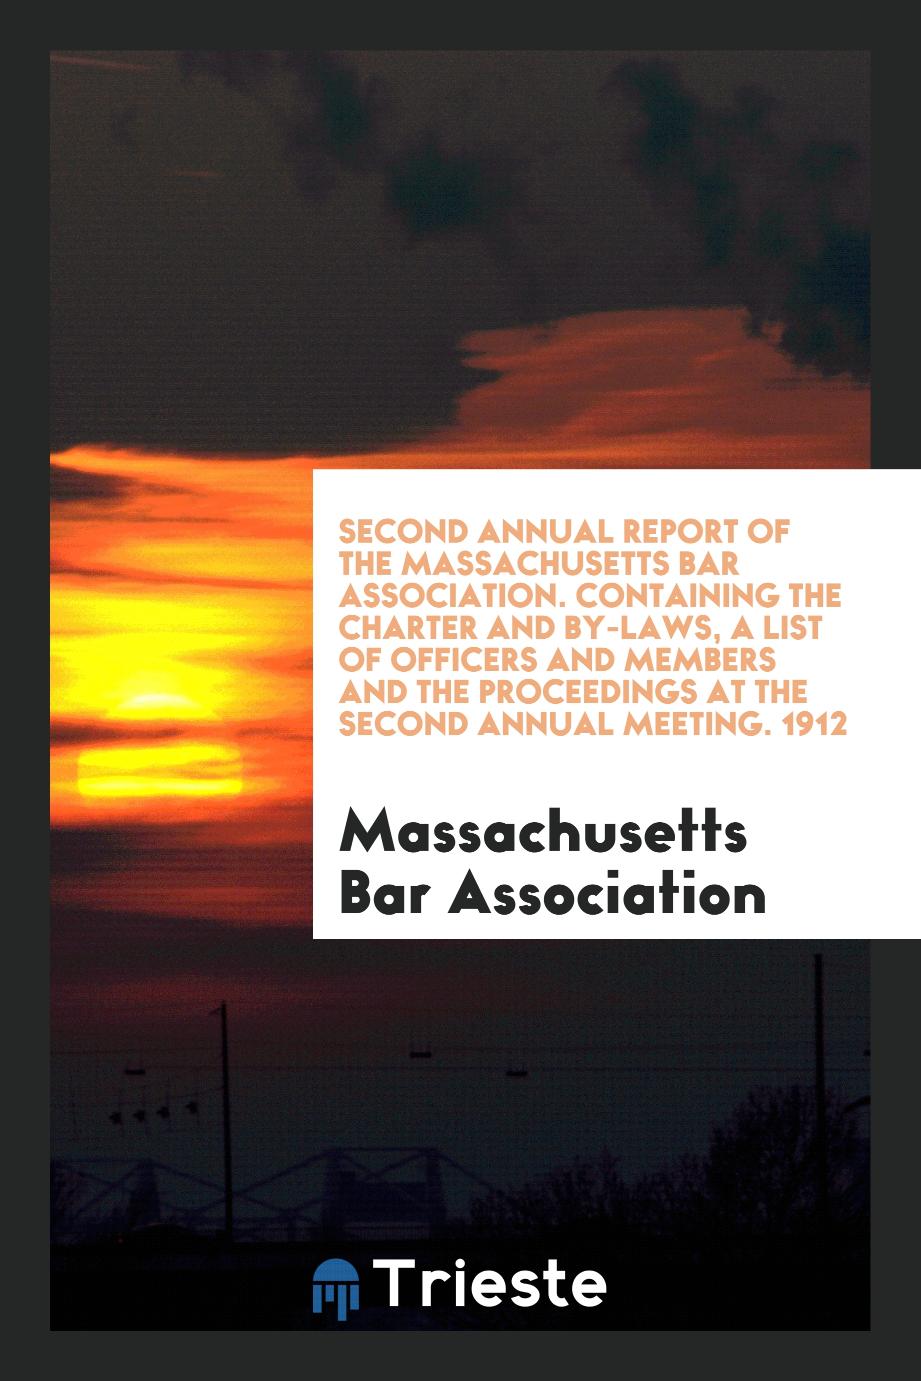 Second Annual Report of the Massachusetts Bar Association. Containing the Charter and By-Laws, A List of Officers and Members and the Proceedings at the Second Annual Meeting. 1912